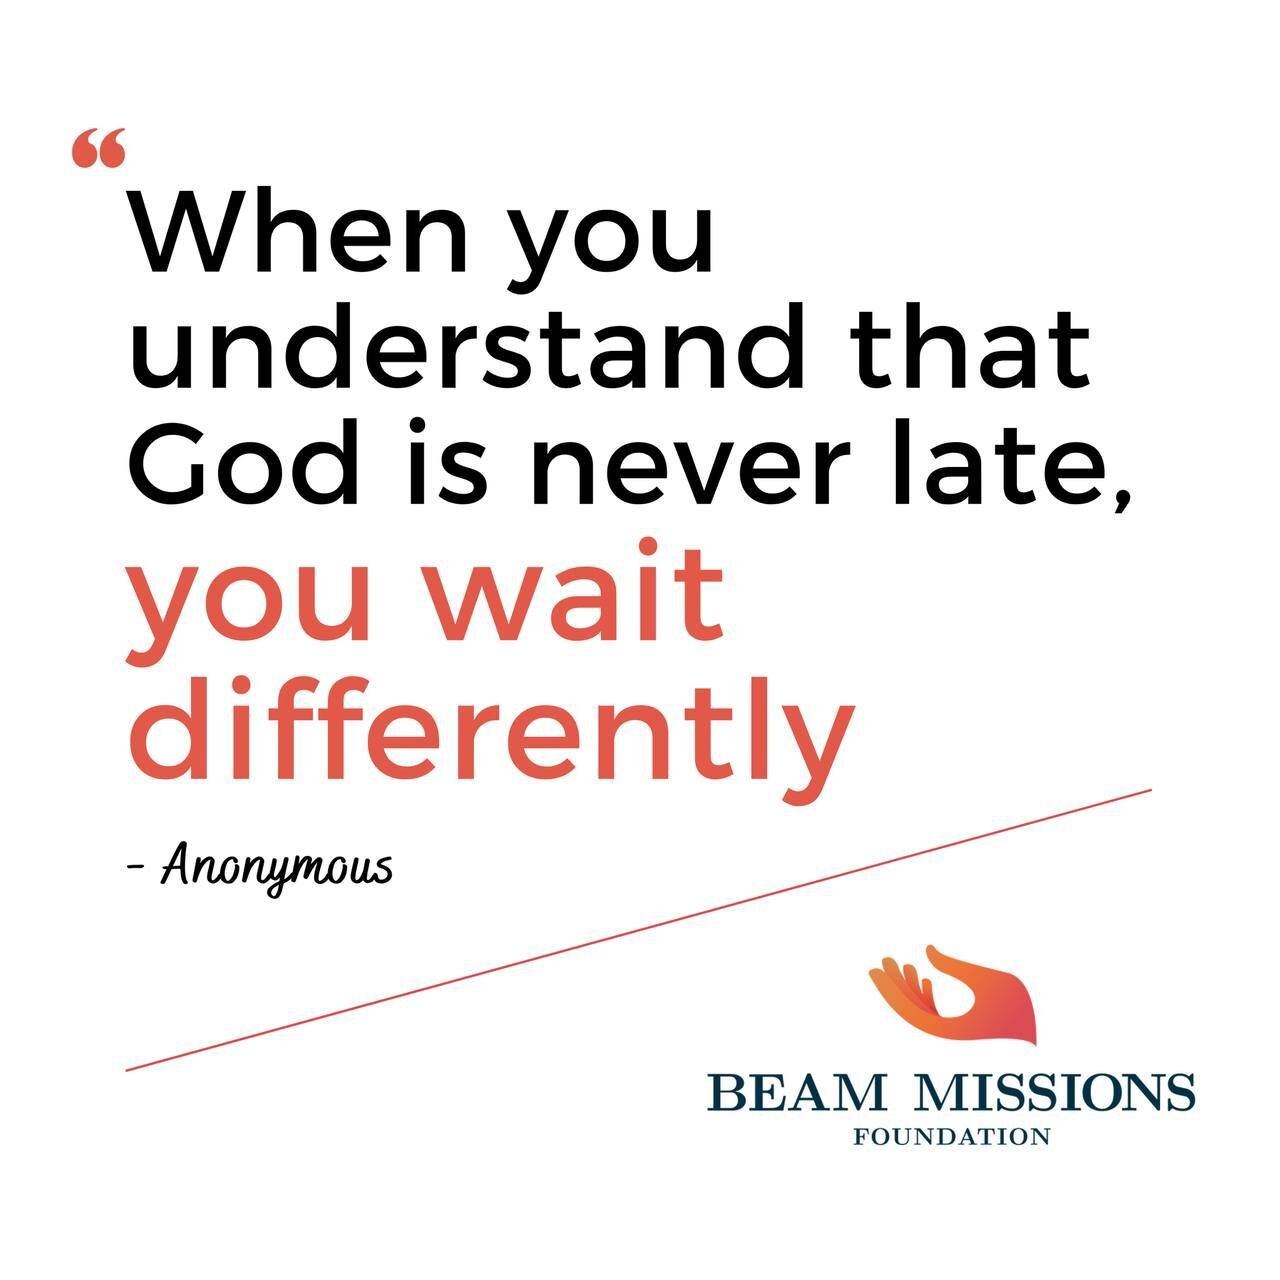 God is never late.